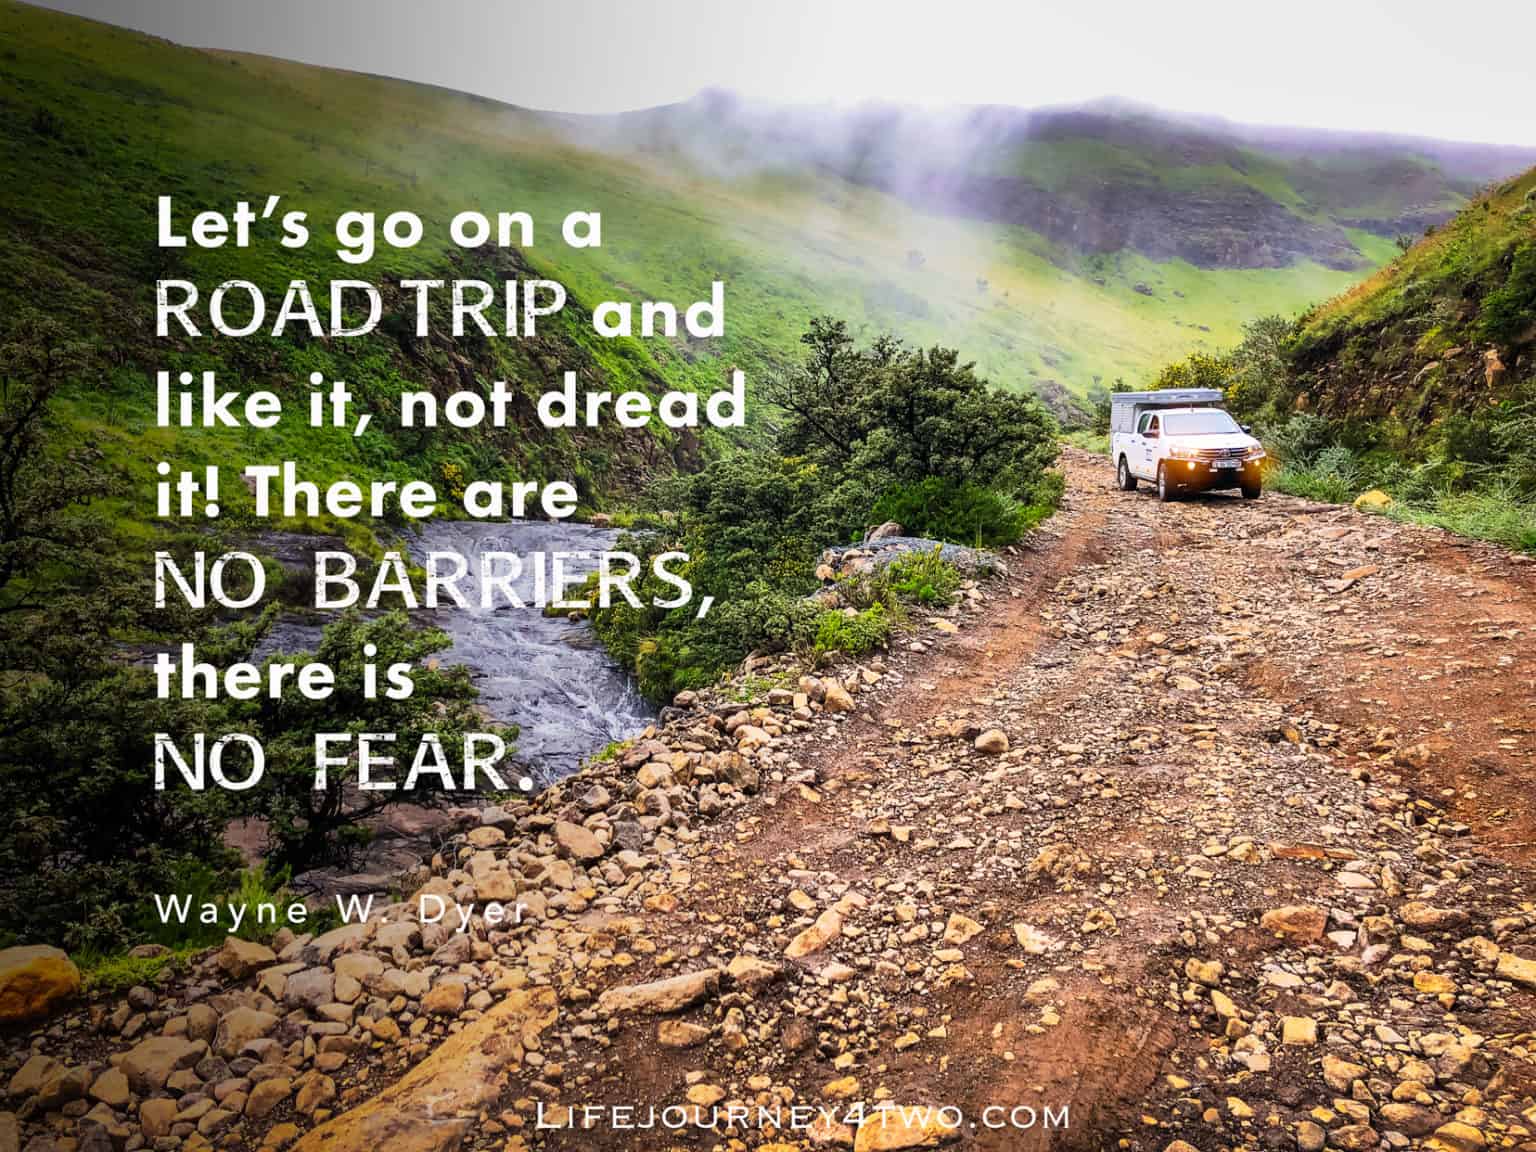 130 Road Trip Quotes (& Images) to Inspire Your Next Adventure